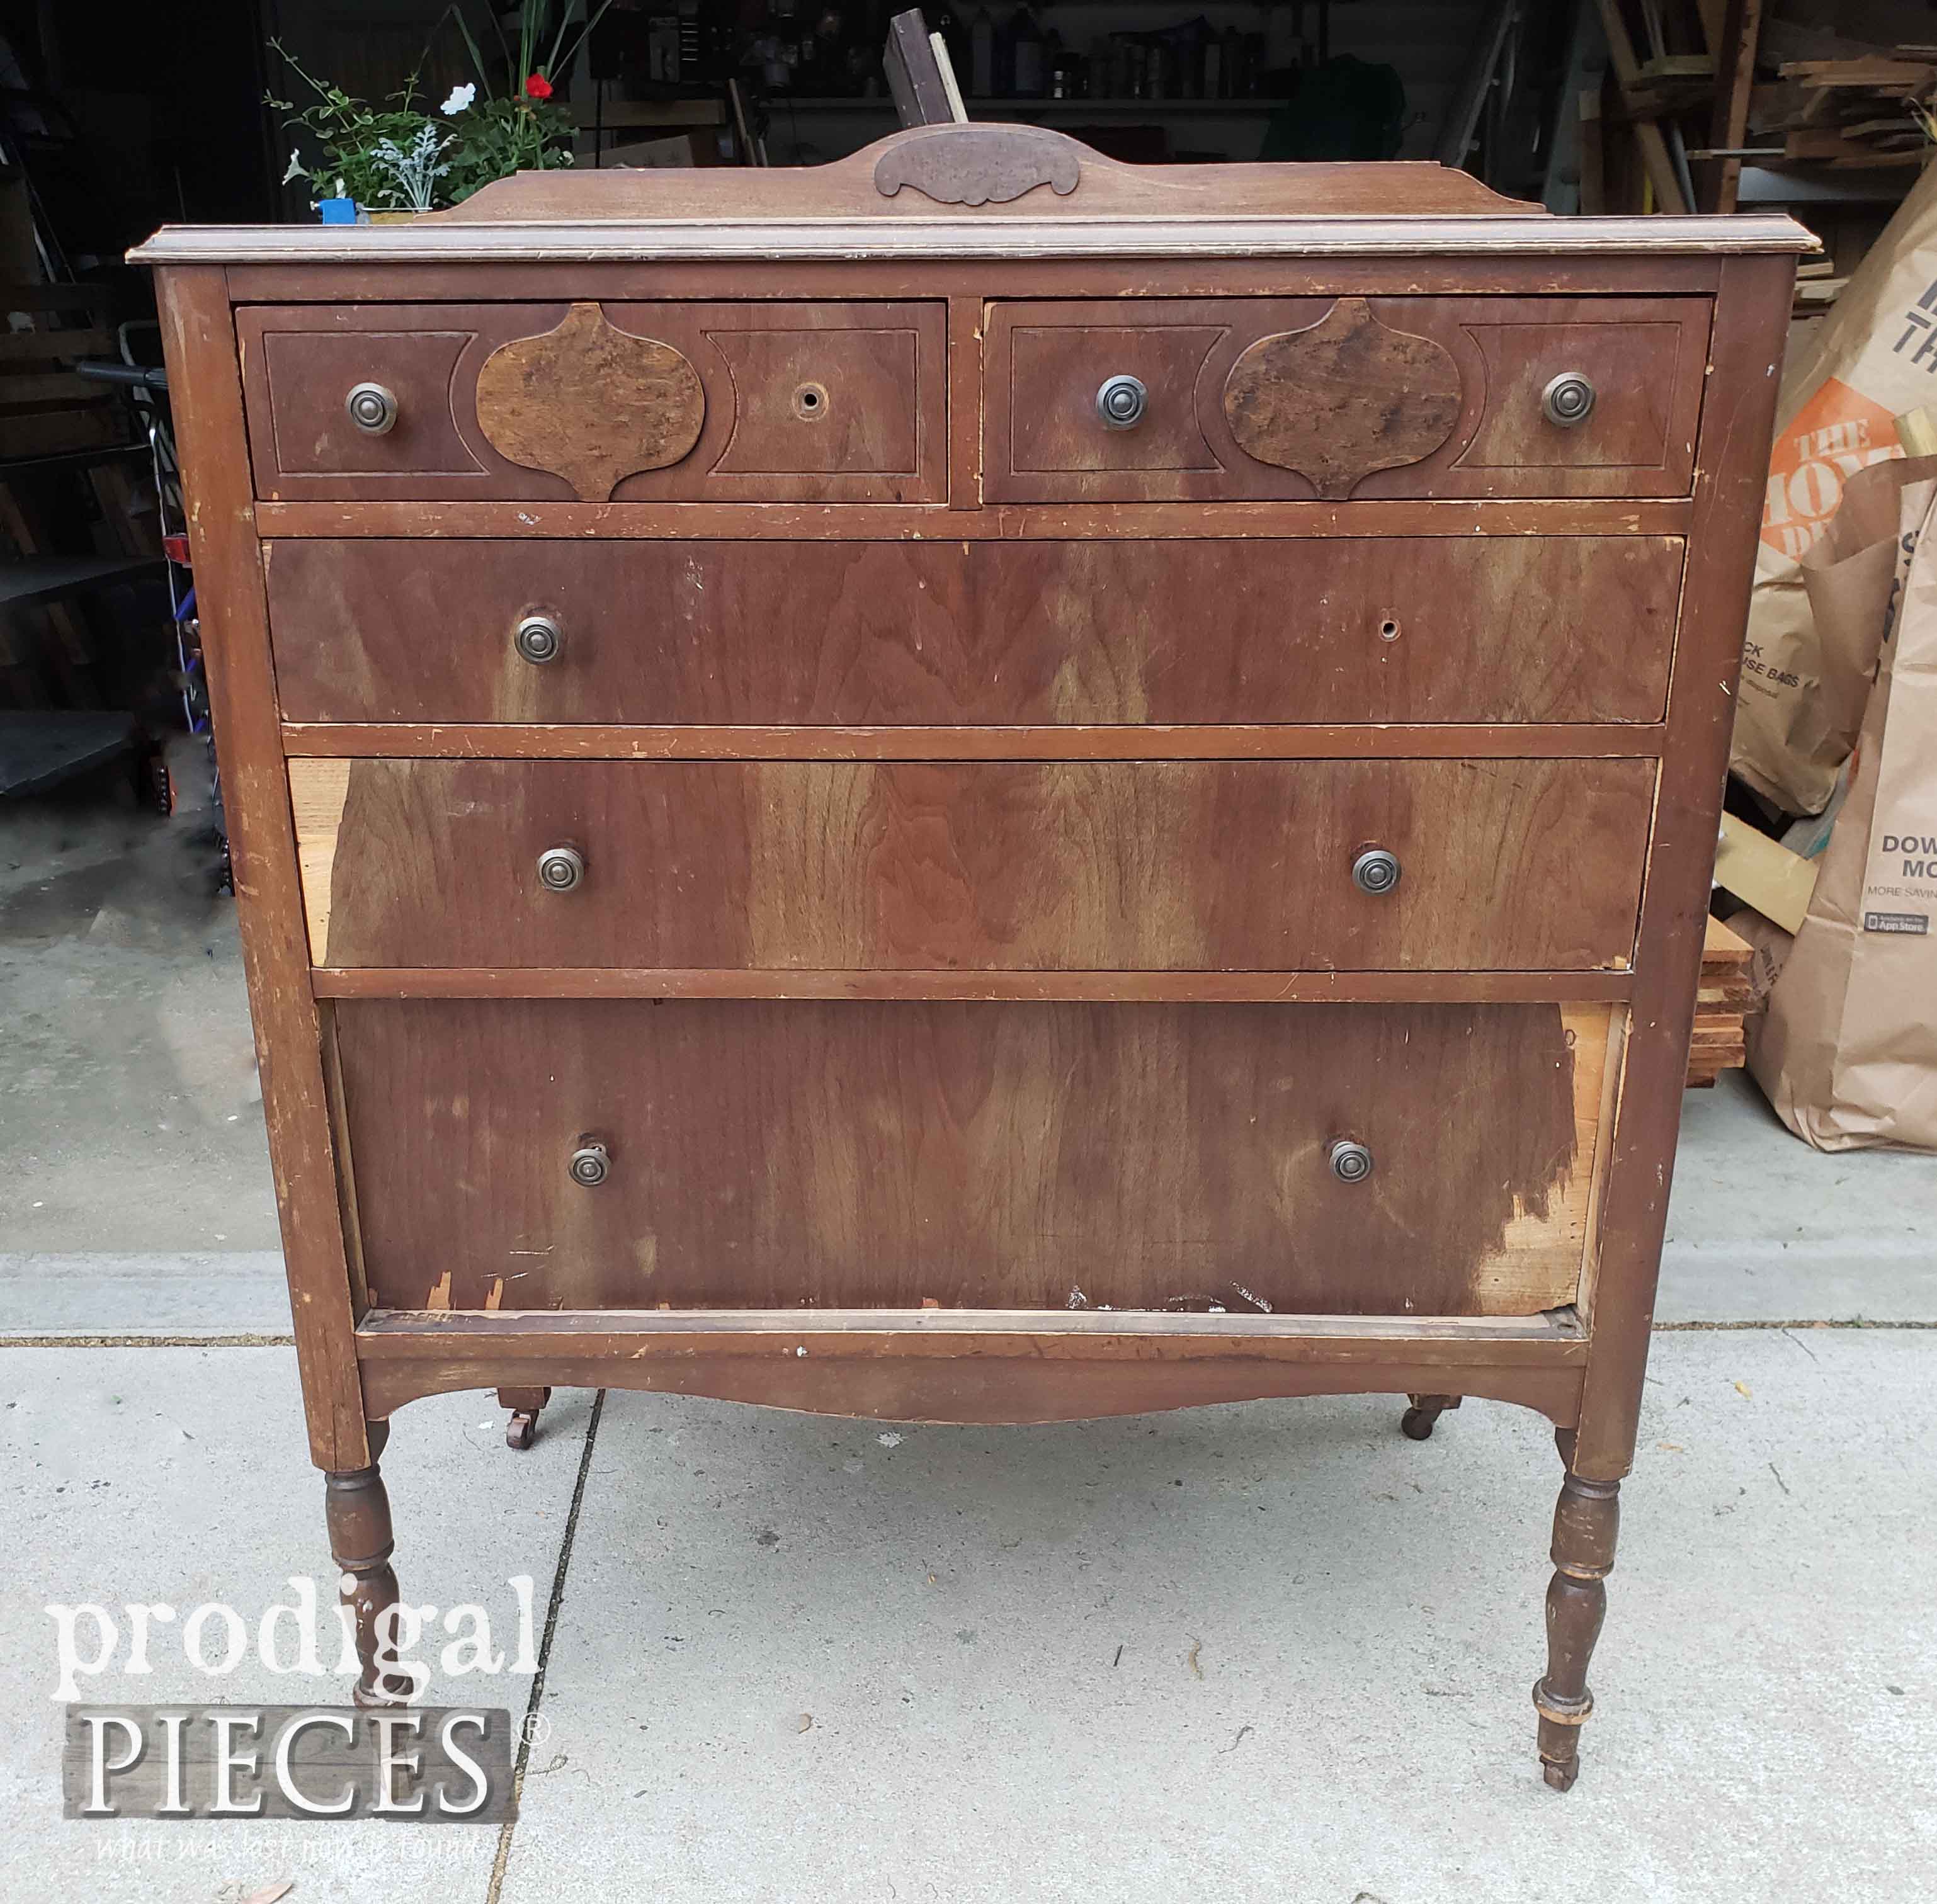 Antique Chest of Drawers with Damage Before Makeover by Prodigal Pieces | prodigalpieces.com